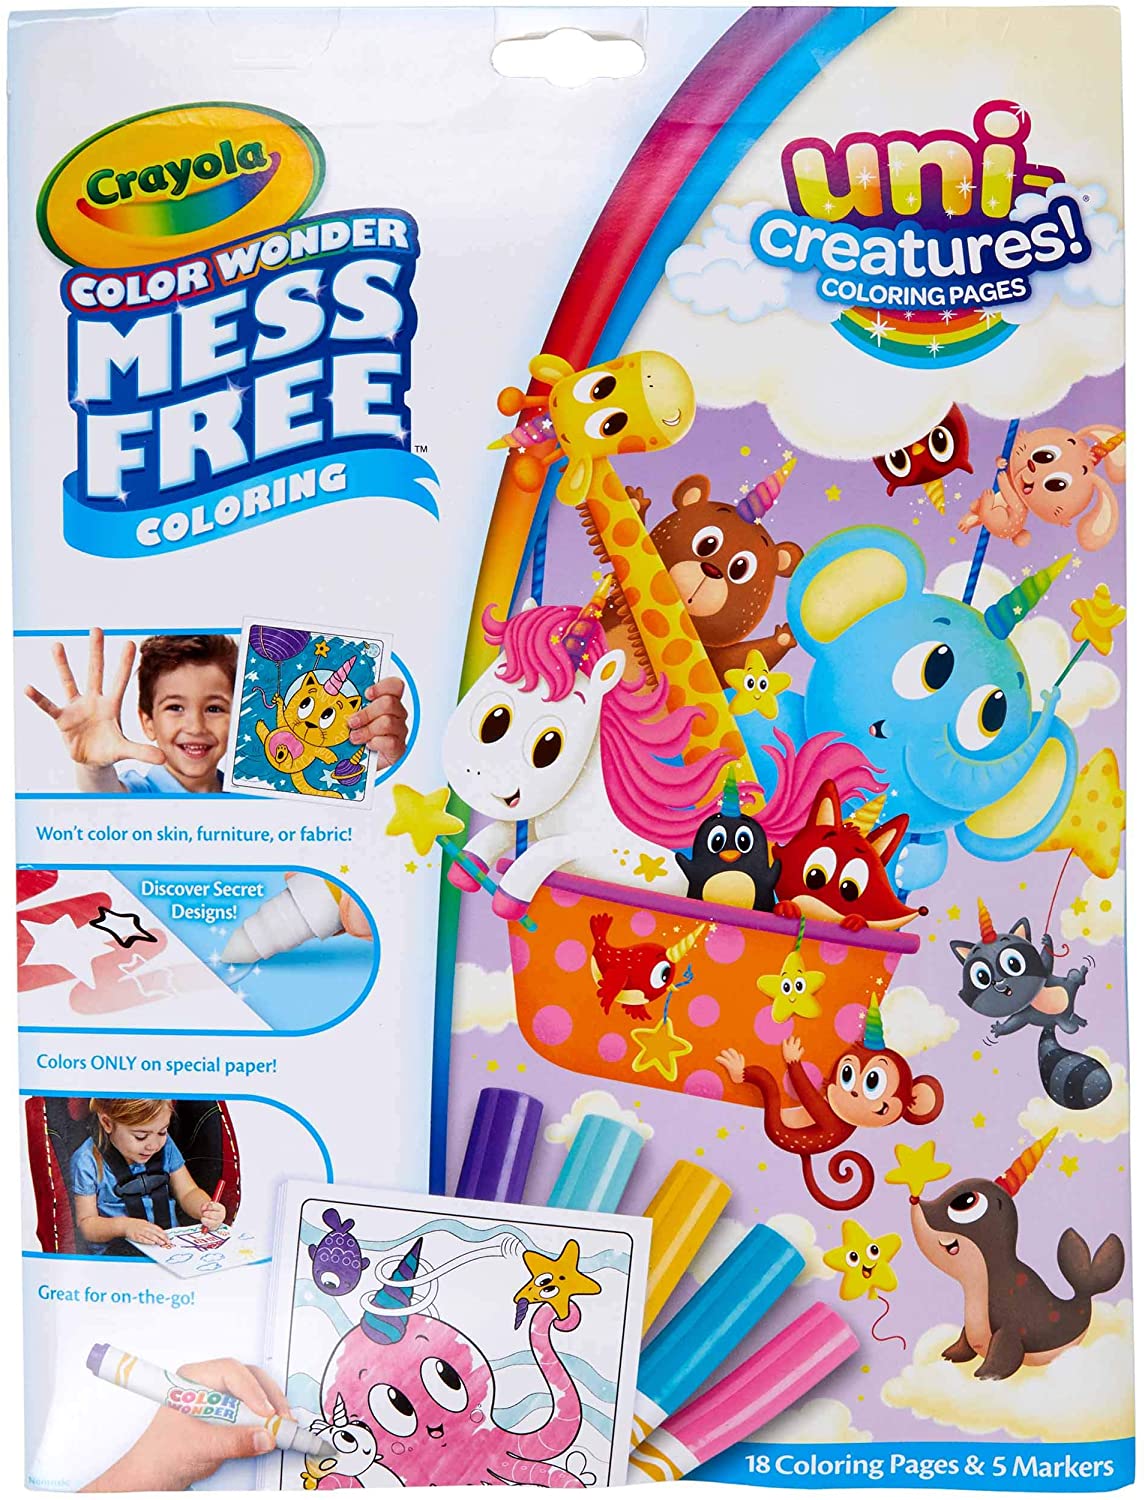 Crayola Color Wonder Unicreatures, Mess Free Coloring Pages & Markers, Gift  for Kids, Age 3, 4, 5, 6